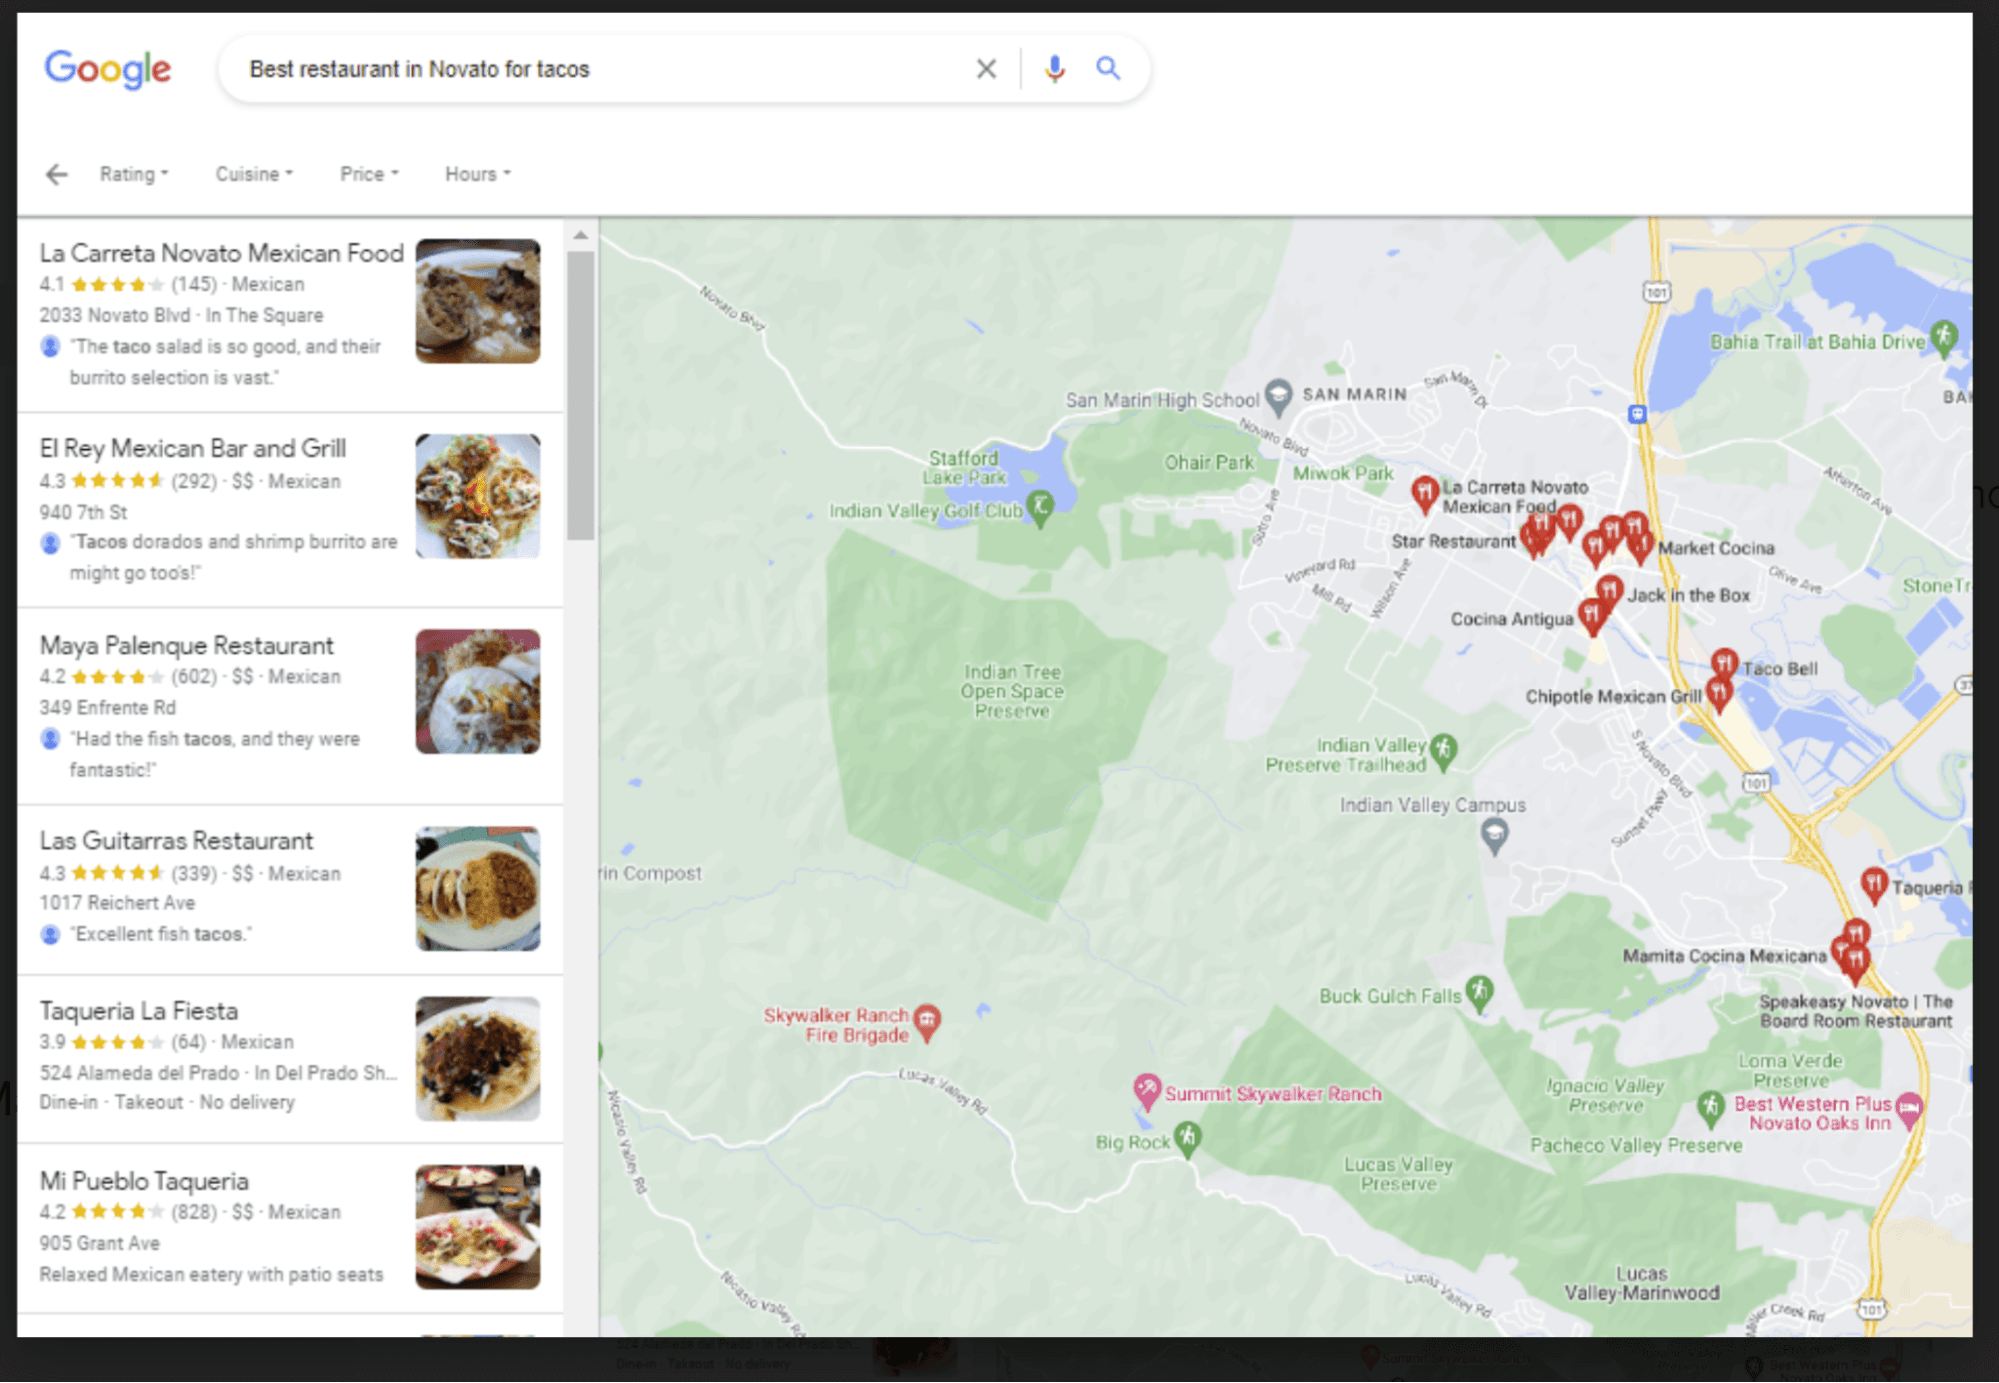 Google local finder results showing top six taco restaurants in Novato, California